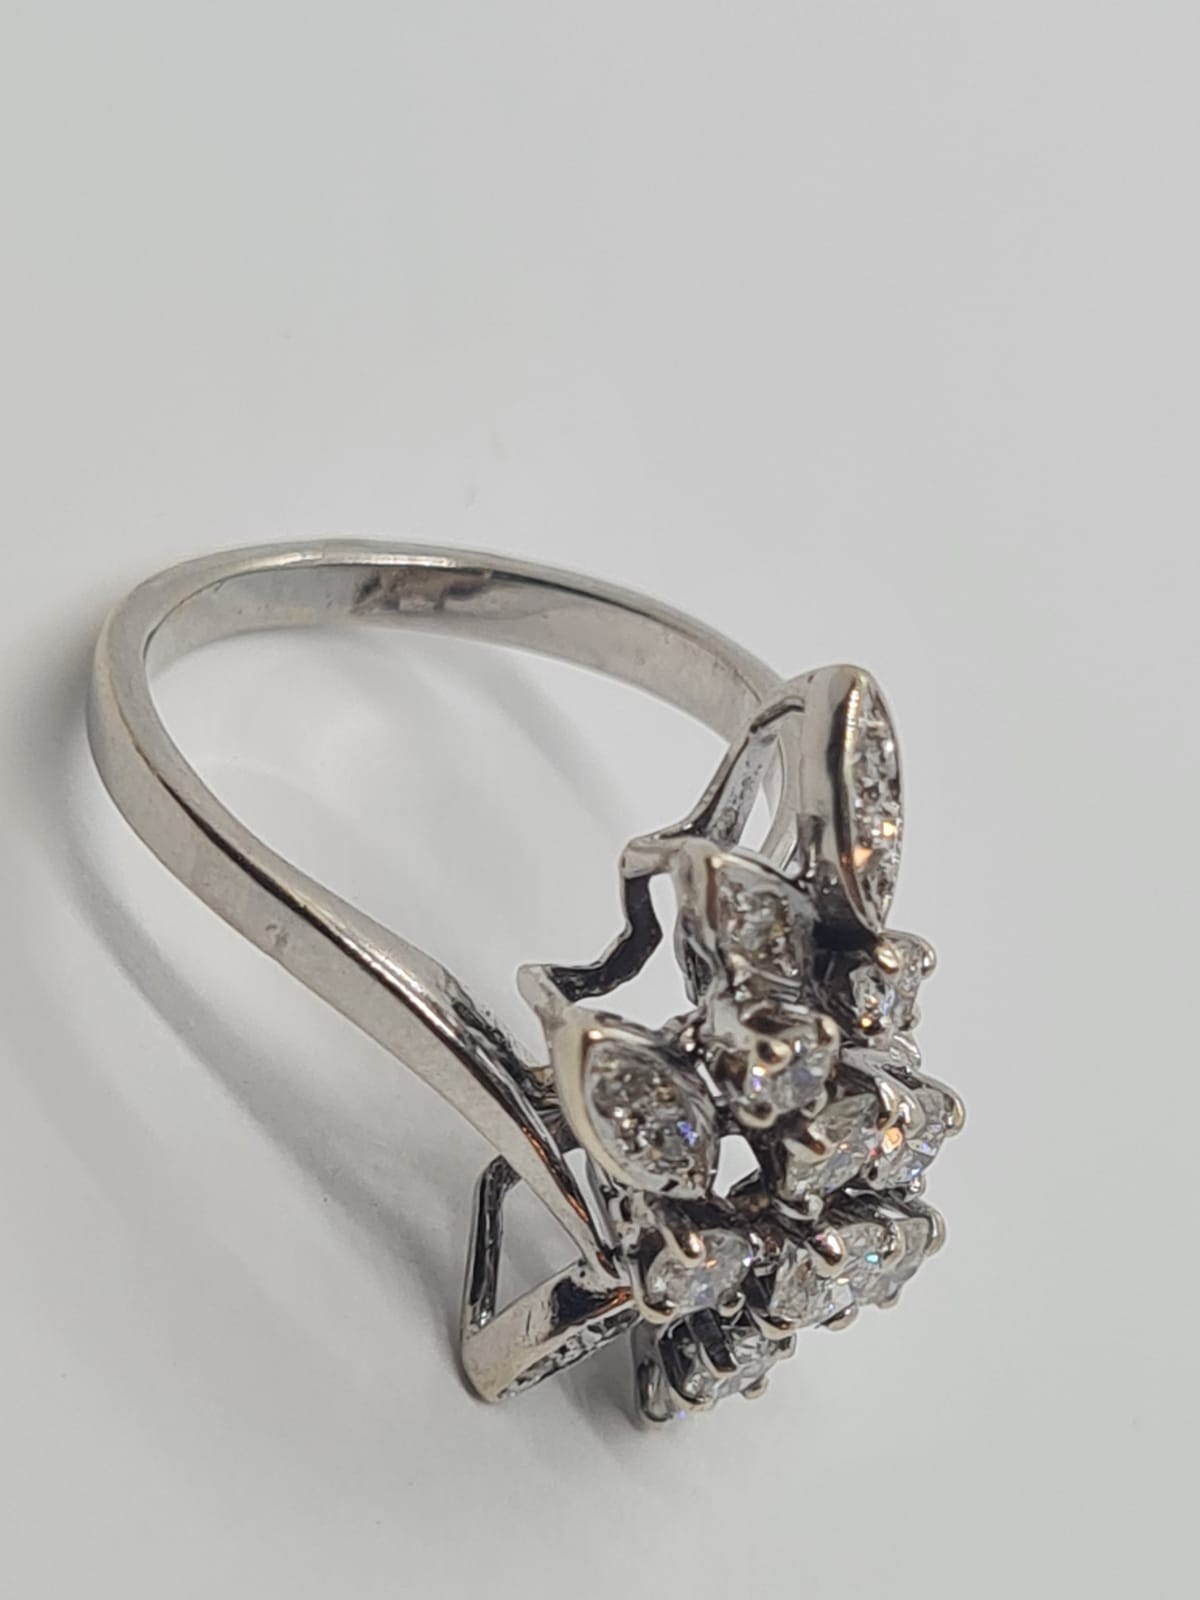 18k white gold French diamond cluster ring with over 1ct quality diamonds, weight 5.2g and size J1/2 - Image 5 of 6